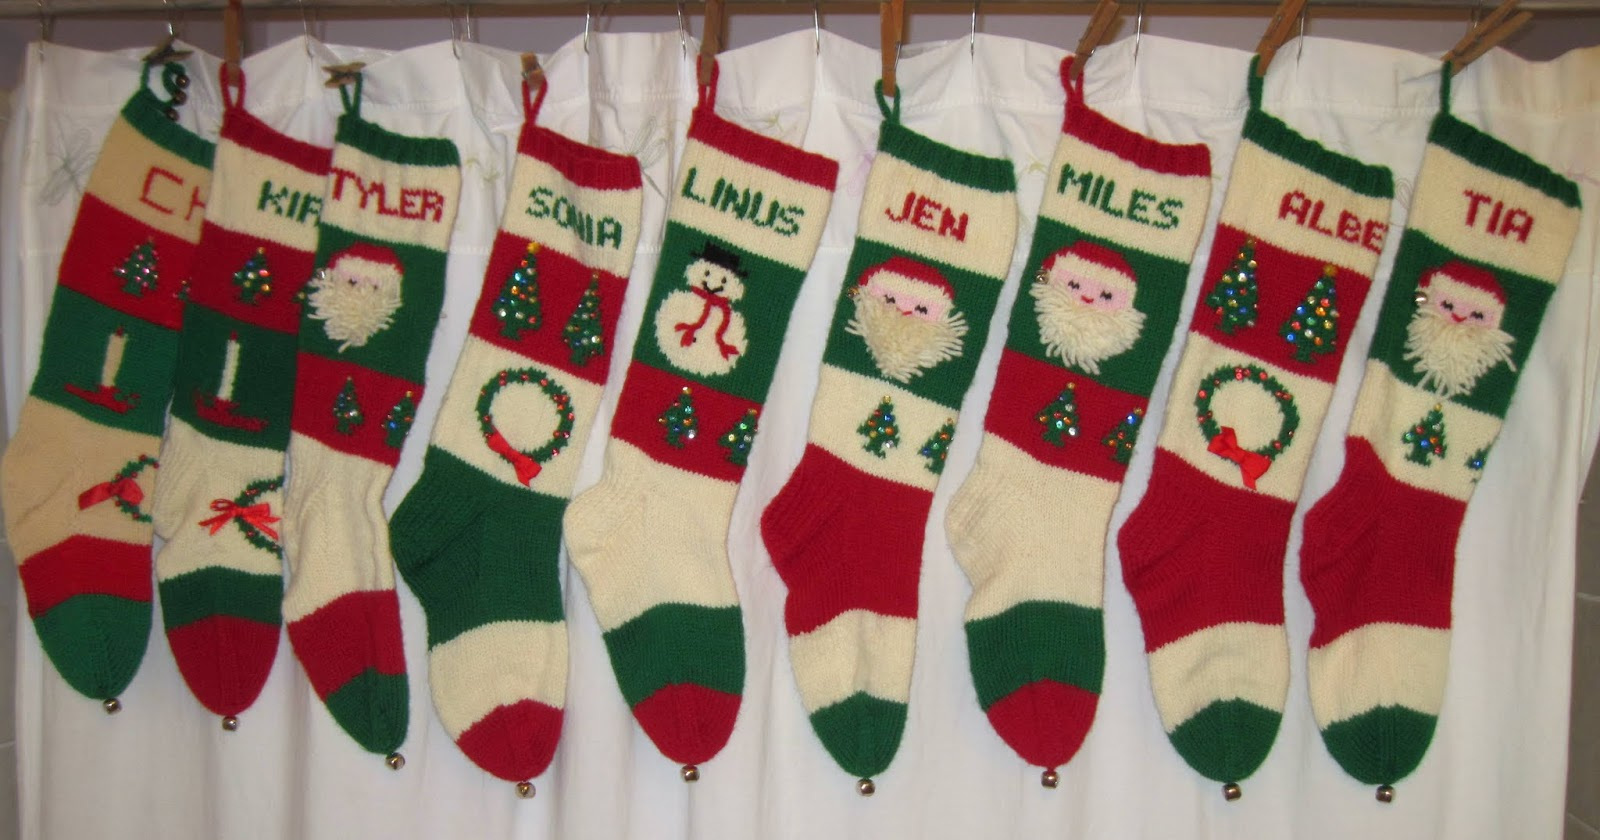 Christmas Stocking Knitting Patterns The Cultured Purl About Christmas Stockings